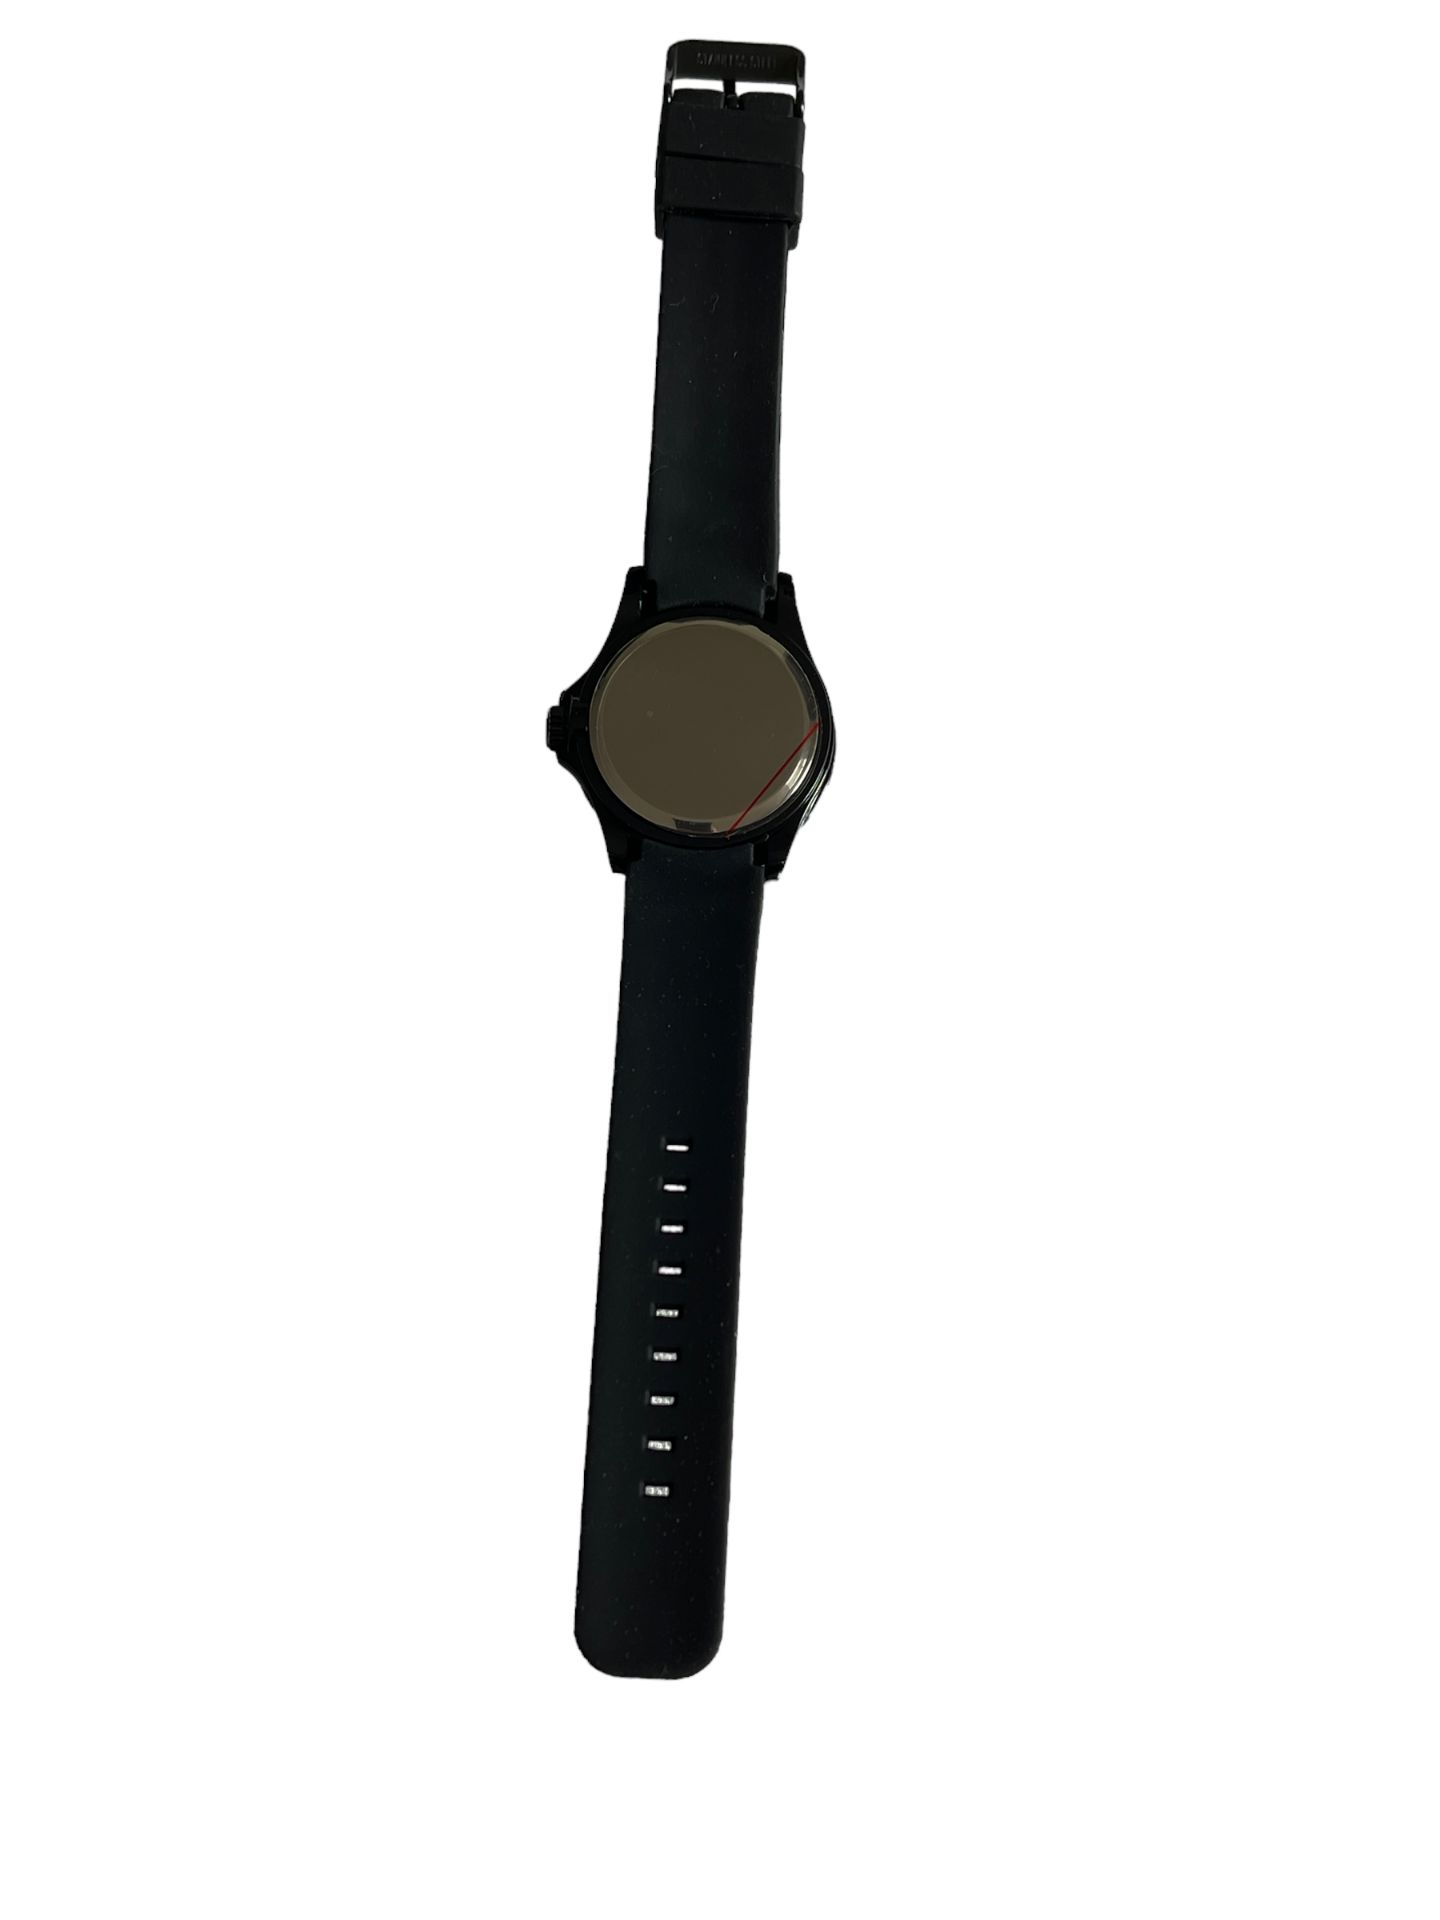 BOEING STAFF ISSUE UNISEX WATCH NEW NEVER BEEN USED - Image 7 of 7